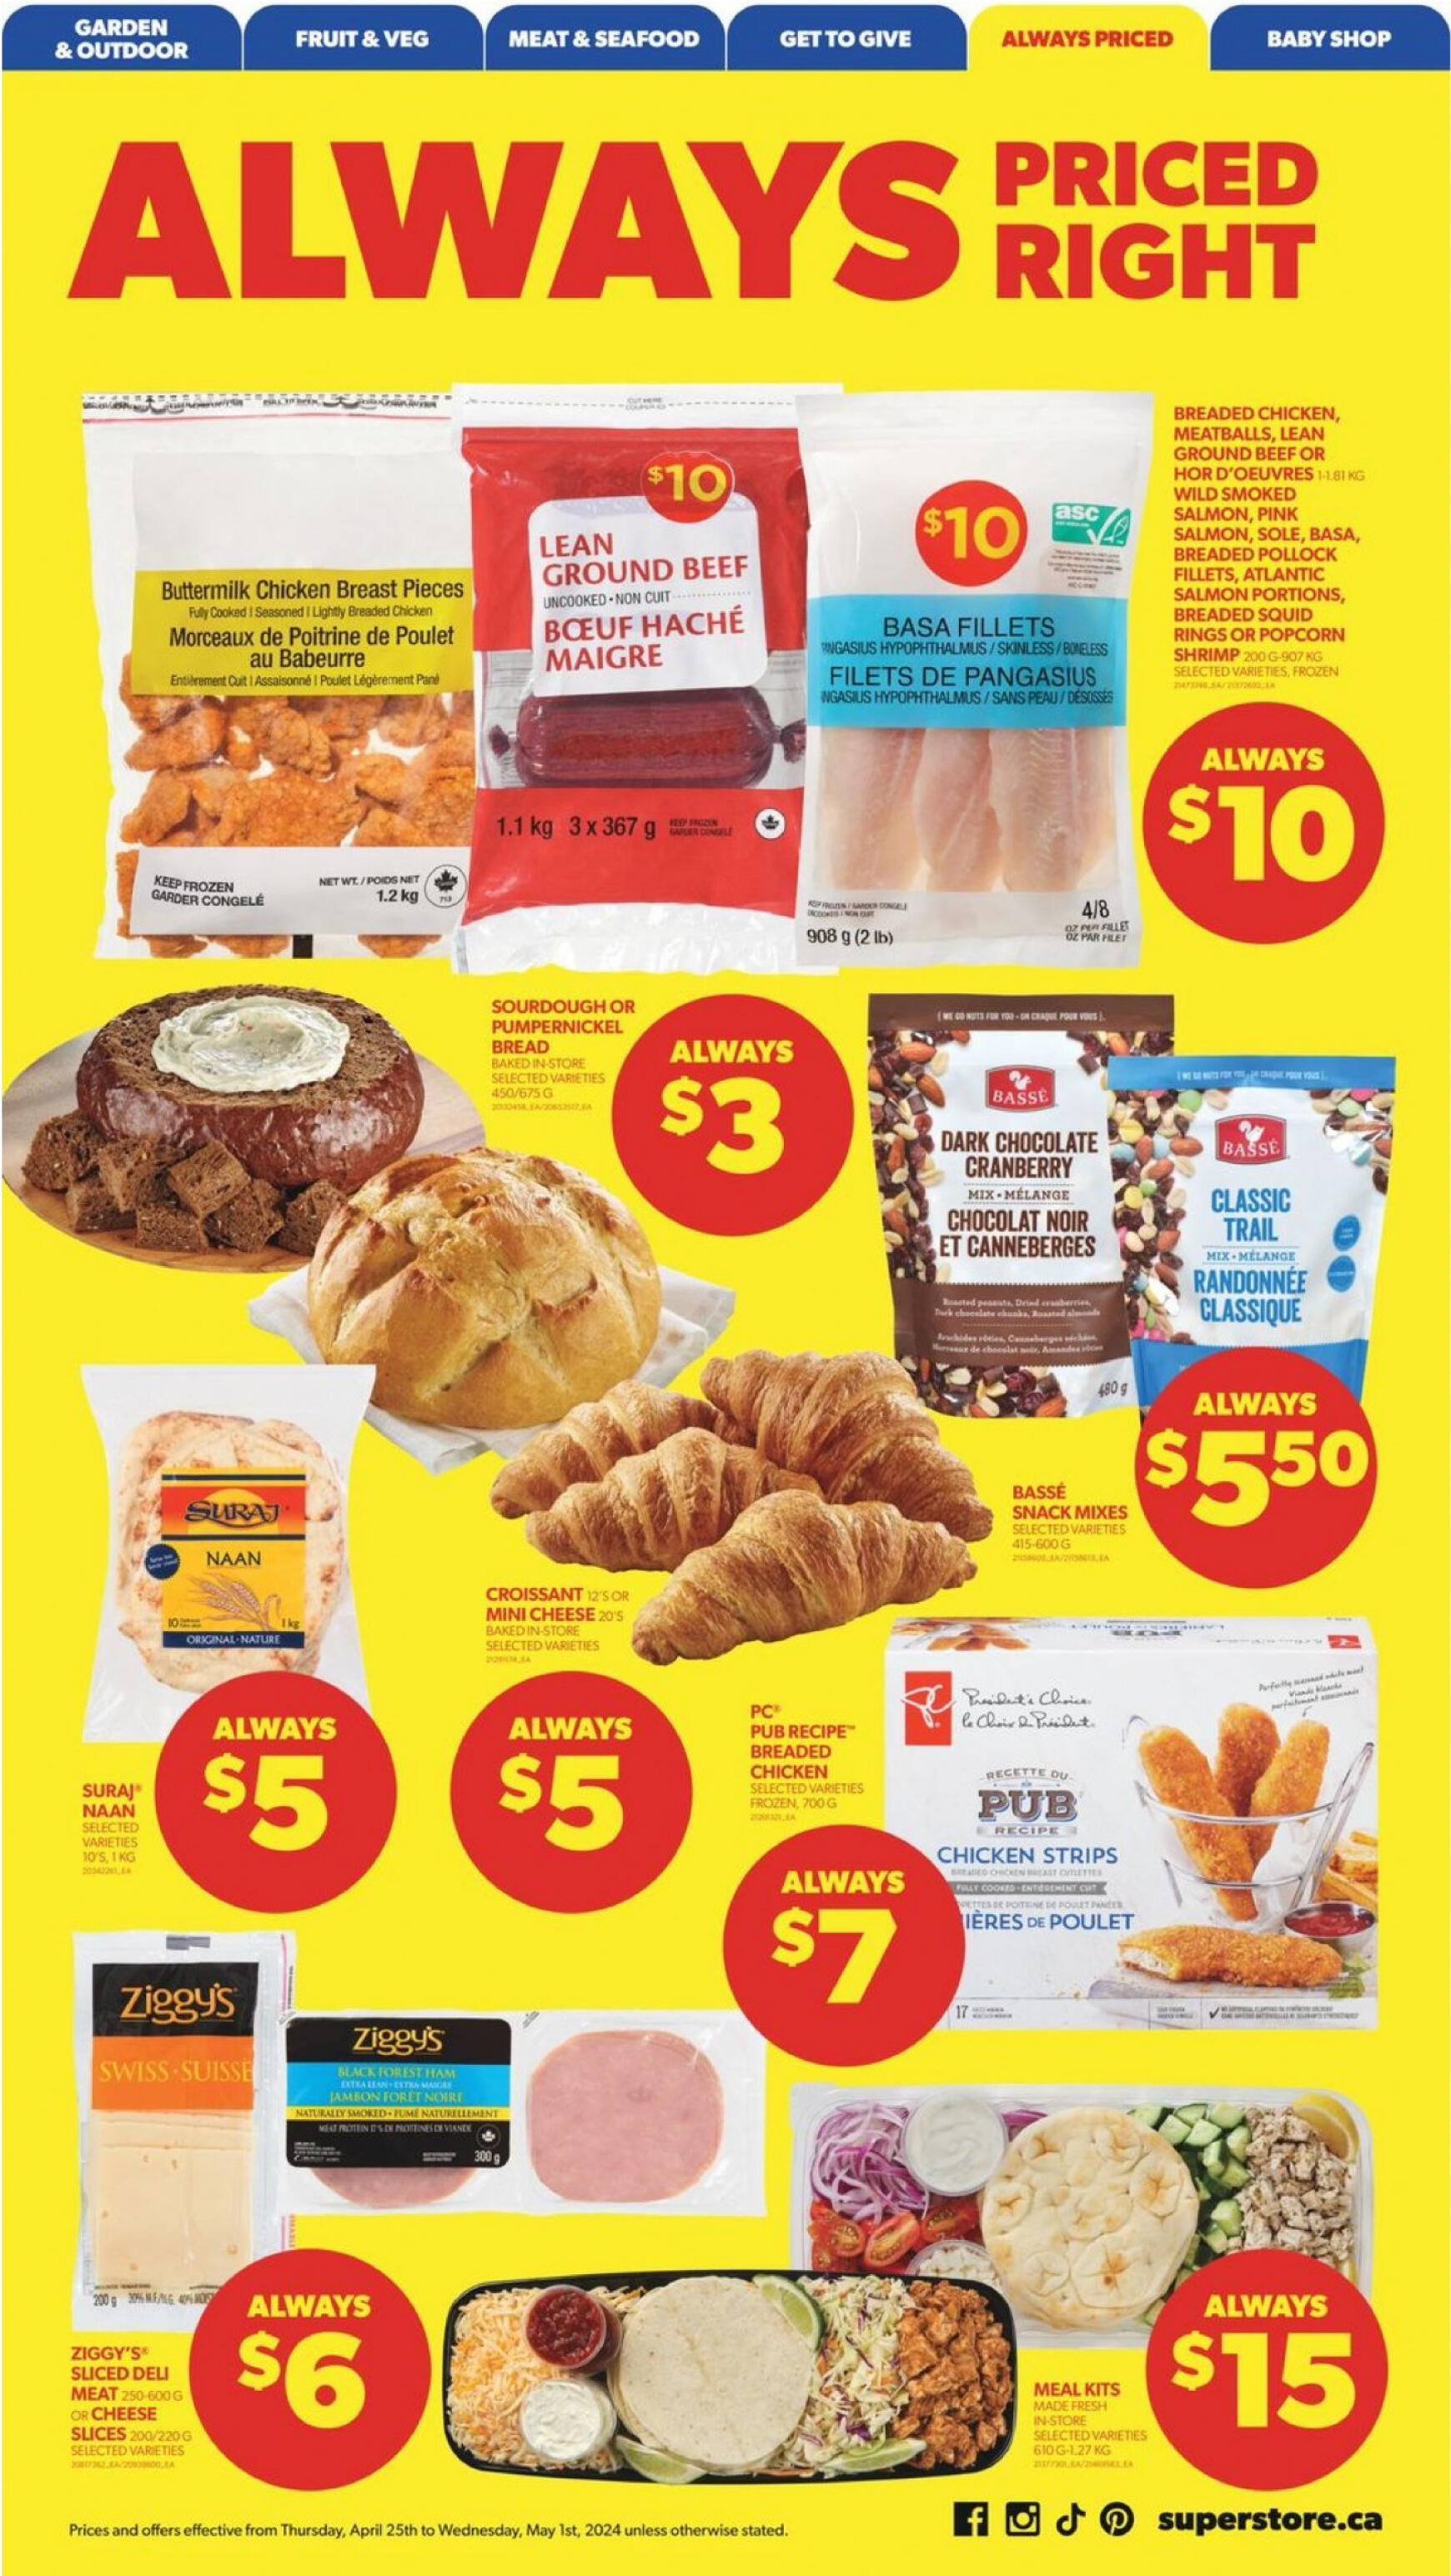 real-canadian-superstore - Real Canadian Superstore flyer current 01.05. - 31.05. - page: 15